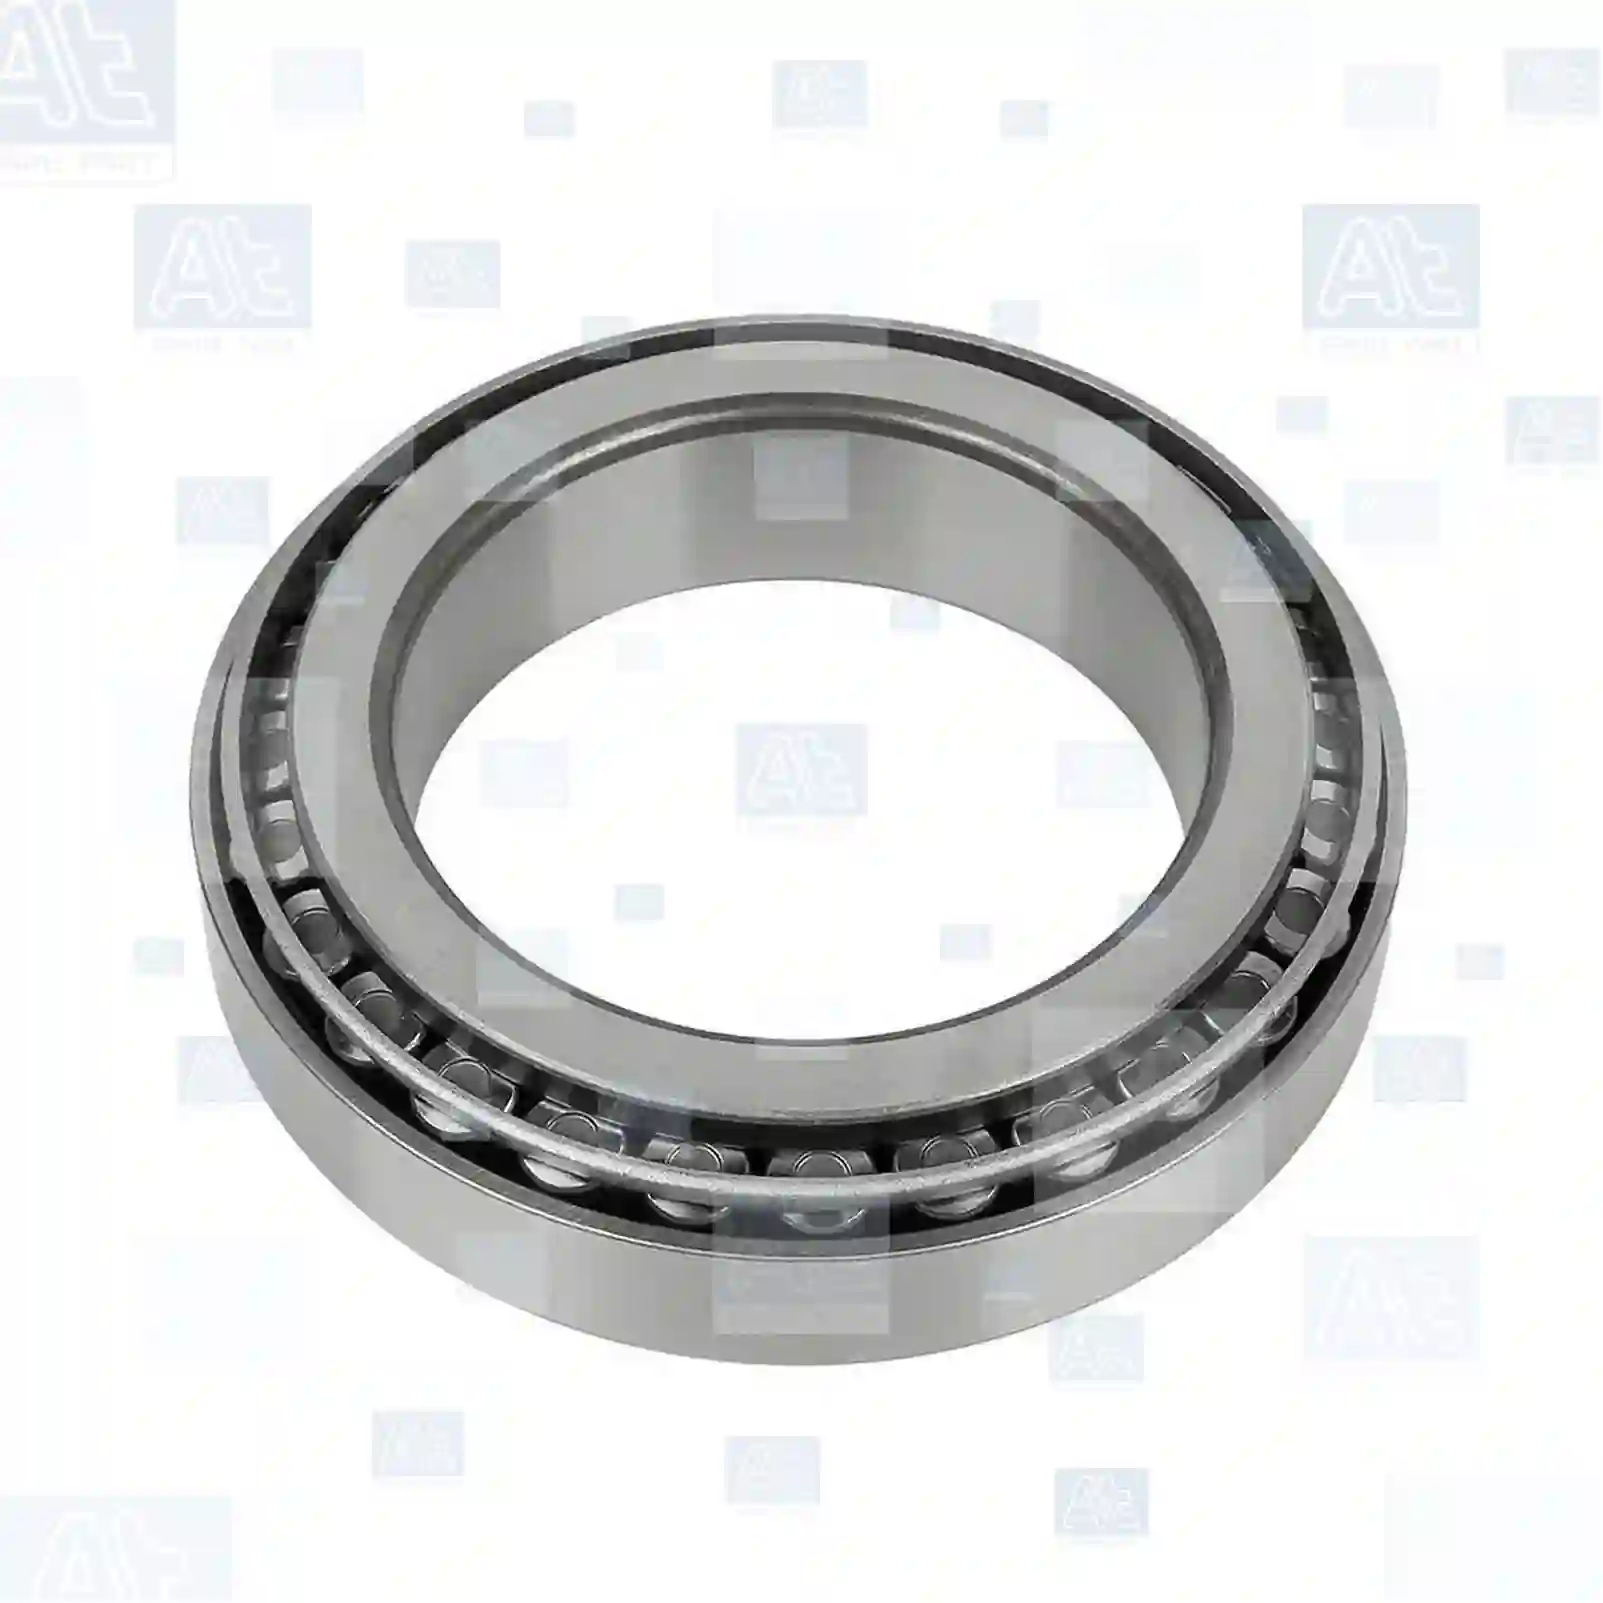 Tapered roller bearing, 77726416, 65699574, 65699674, 01104922, 9442198, 01104922, 01905306, 08190538, 08193819, 1104922, 1905306, 23336044, 5001843131, 8190538, 8193819, 06324801600, 06324890070, 06324890071, 06324890116, 0009814418, 0039812505, 003981250567, 0039812705, 0099819401, 0109817005, 0109817705, 0023336044, 7420582548, 1415140, 6691453000, 20582548, 8171087 ||  77726416 At Spare Part | Engine, Accelerator Pedal, Camshaft, Connecting Rod, Crankcase, Crankshaft, Cylinder Head, Engine Suspension Mountings, Exhaust Manifold, Exhaust Gas Recirculation, Filter Kits, Flywheel Housing, General Overhaul Kits, Engine, Intake Manifold, Oil Cleaner, Oil Cooler, Oil Filter, Oil Pump, Oil Sump, Piston & Liner, Sensor & Switch, Timing Case, Turbocharger, Cooling System, Belt Tensioner, Coolant Filter, Coolant Pipe, Corrosion Prevention Agent, Drive, Expansion Tank, Fan, Intercooler, Monitors & Gauges, Radiator, Thermostat, V-Belt / Timing belt, Water Pump, Fuel System, Electronical Injector Unit, Feed Pump, Fuel Filter, cpl., Fuel Gauge Sender,  Fuel Line, Fuel Pump, Fuel Tank, Injection Line Kit, Injection Pump, Exhaust System, Clutch & Pedal, Gearbox, Propeller Shaft, Axles, Brake System, Hubs & Wheels, Suspension, Leaf Spring, Universal Parts / Accessories, Steering, Electrical System, Cabin Tapered roller bearing, 77726416, 65699574, 65699674, 01104922, 9442198, 01104922, 01905306, 08190538, 08193819, 1104922, 1905306, 23336044, 5001843131, 8190538, 8193819, 06324801600, 06324890070, 06324890071, 06324890116, 0009814418, 0039812505, 003981250567, 0039812705, 0099819401, 0109817005, 0109817705, 0023336044, 7420582548, 1415140, 6691453000, 20582548, 8171087 ||  77726416 At Spare Part | Engine, Accelerator Pedal, Camshaft, Connecting Rod, Crankcase, Crankshaft, Cylinder Head, Engine Suspension Mountings, Exhaust Manifold, Exhaust Gas Recirculation, Filter Kits, Flywheel Housing, General Overhaul Kits, Engine, Intake Manifold, Oil Cleaner, Oil Cooler, Oil Filter, Oil Pump, Oil Sump, Piston & Liner, Sensor & Switch, Timing Case, Turbocharger, Cooling System, Belt Tensioner, Coolant Filter, Coolant Pipe, Corrosion Prevention Agent, Drive, Expansion Tank, Fan, Intercooler, Monitors & Gauges, Radiator, Thermostat, V-Belt / Timing belt, Water Pump, Fuel System, Electronical Injector Unit, Feed Pump, Fuel Filter, cpl., Fuel Gauge Sender,  Fuel Line, Fuel Pump, Fuel Tank, Injection Line Kit, Injection Pump, Exhaust System, Clutch & Pedal, Gearbox, Propeller Shaft, Axles, Brake System, Hubs & Wheels, Suspension, Leaf Spring, Universal Parts / Accessories, Steering, Electrical System, Cabin